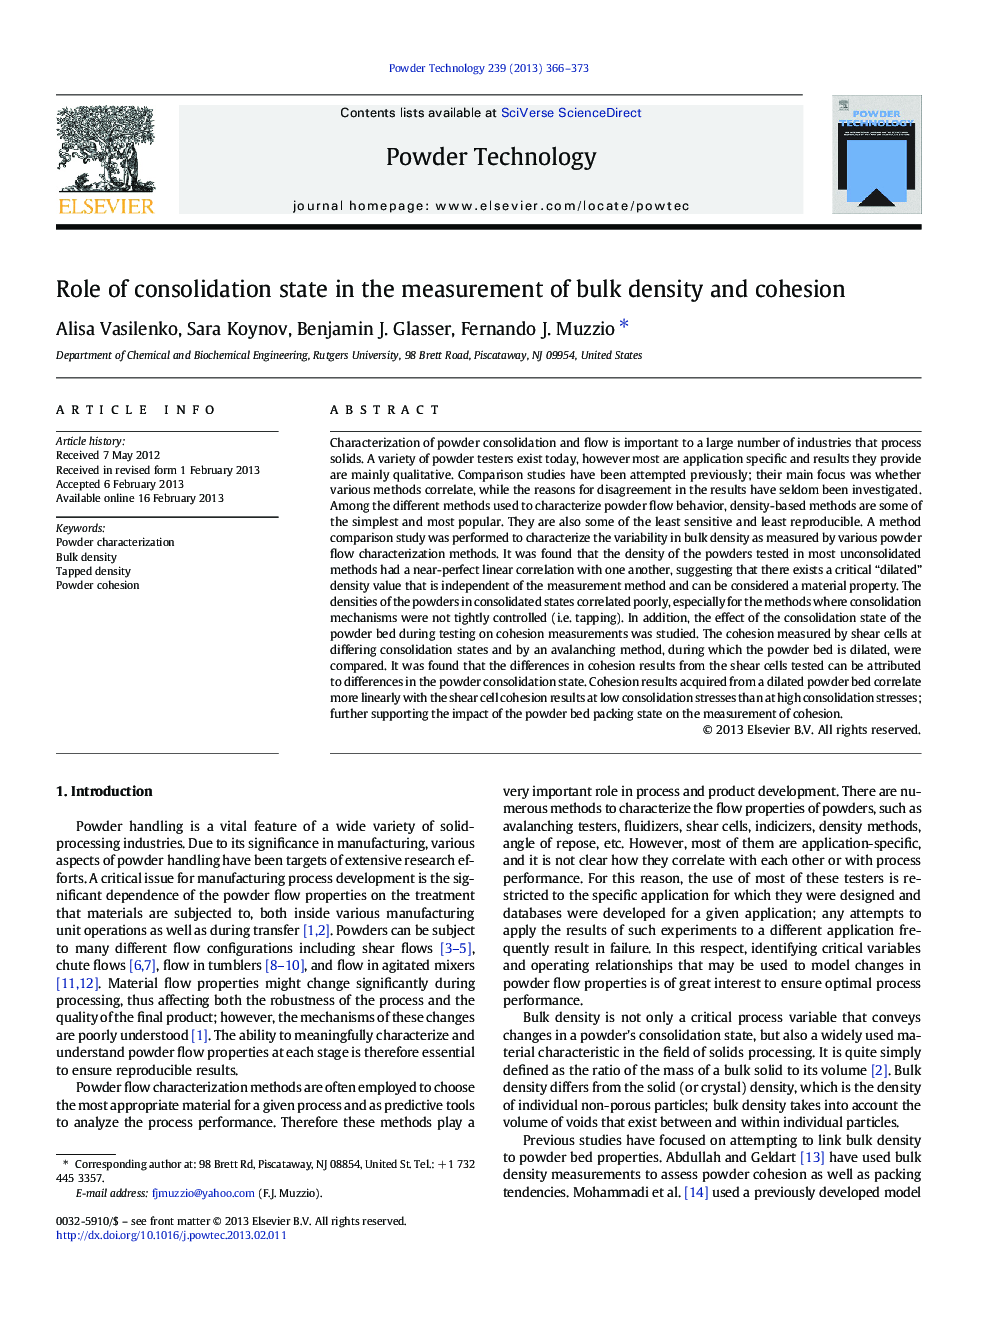 Role of consolidation state in the measurement of bulk density and cohesion